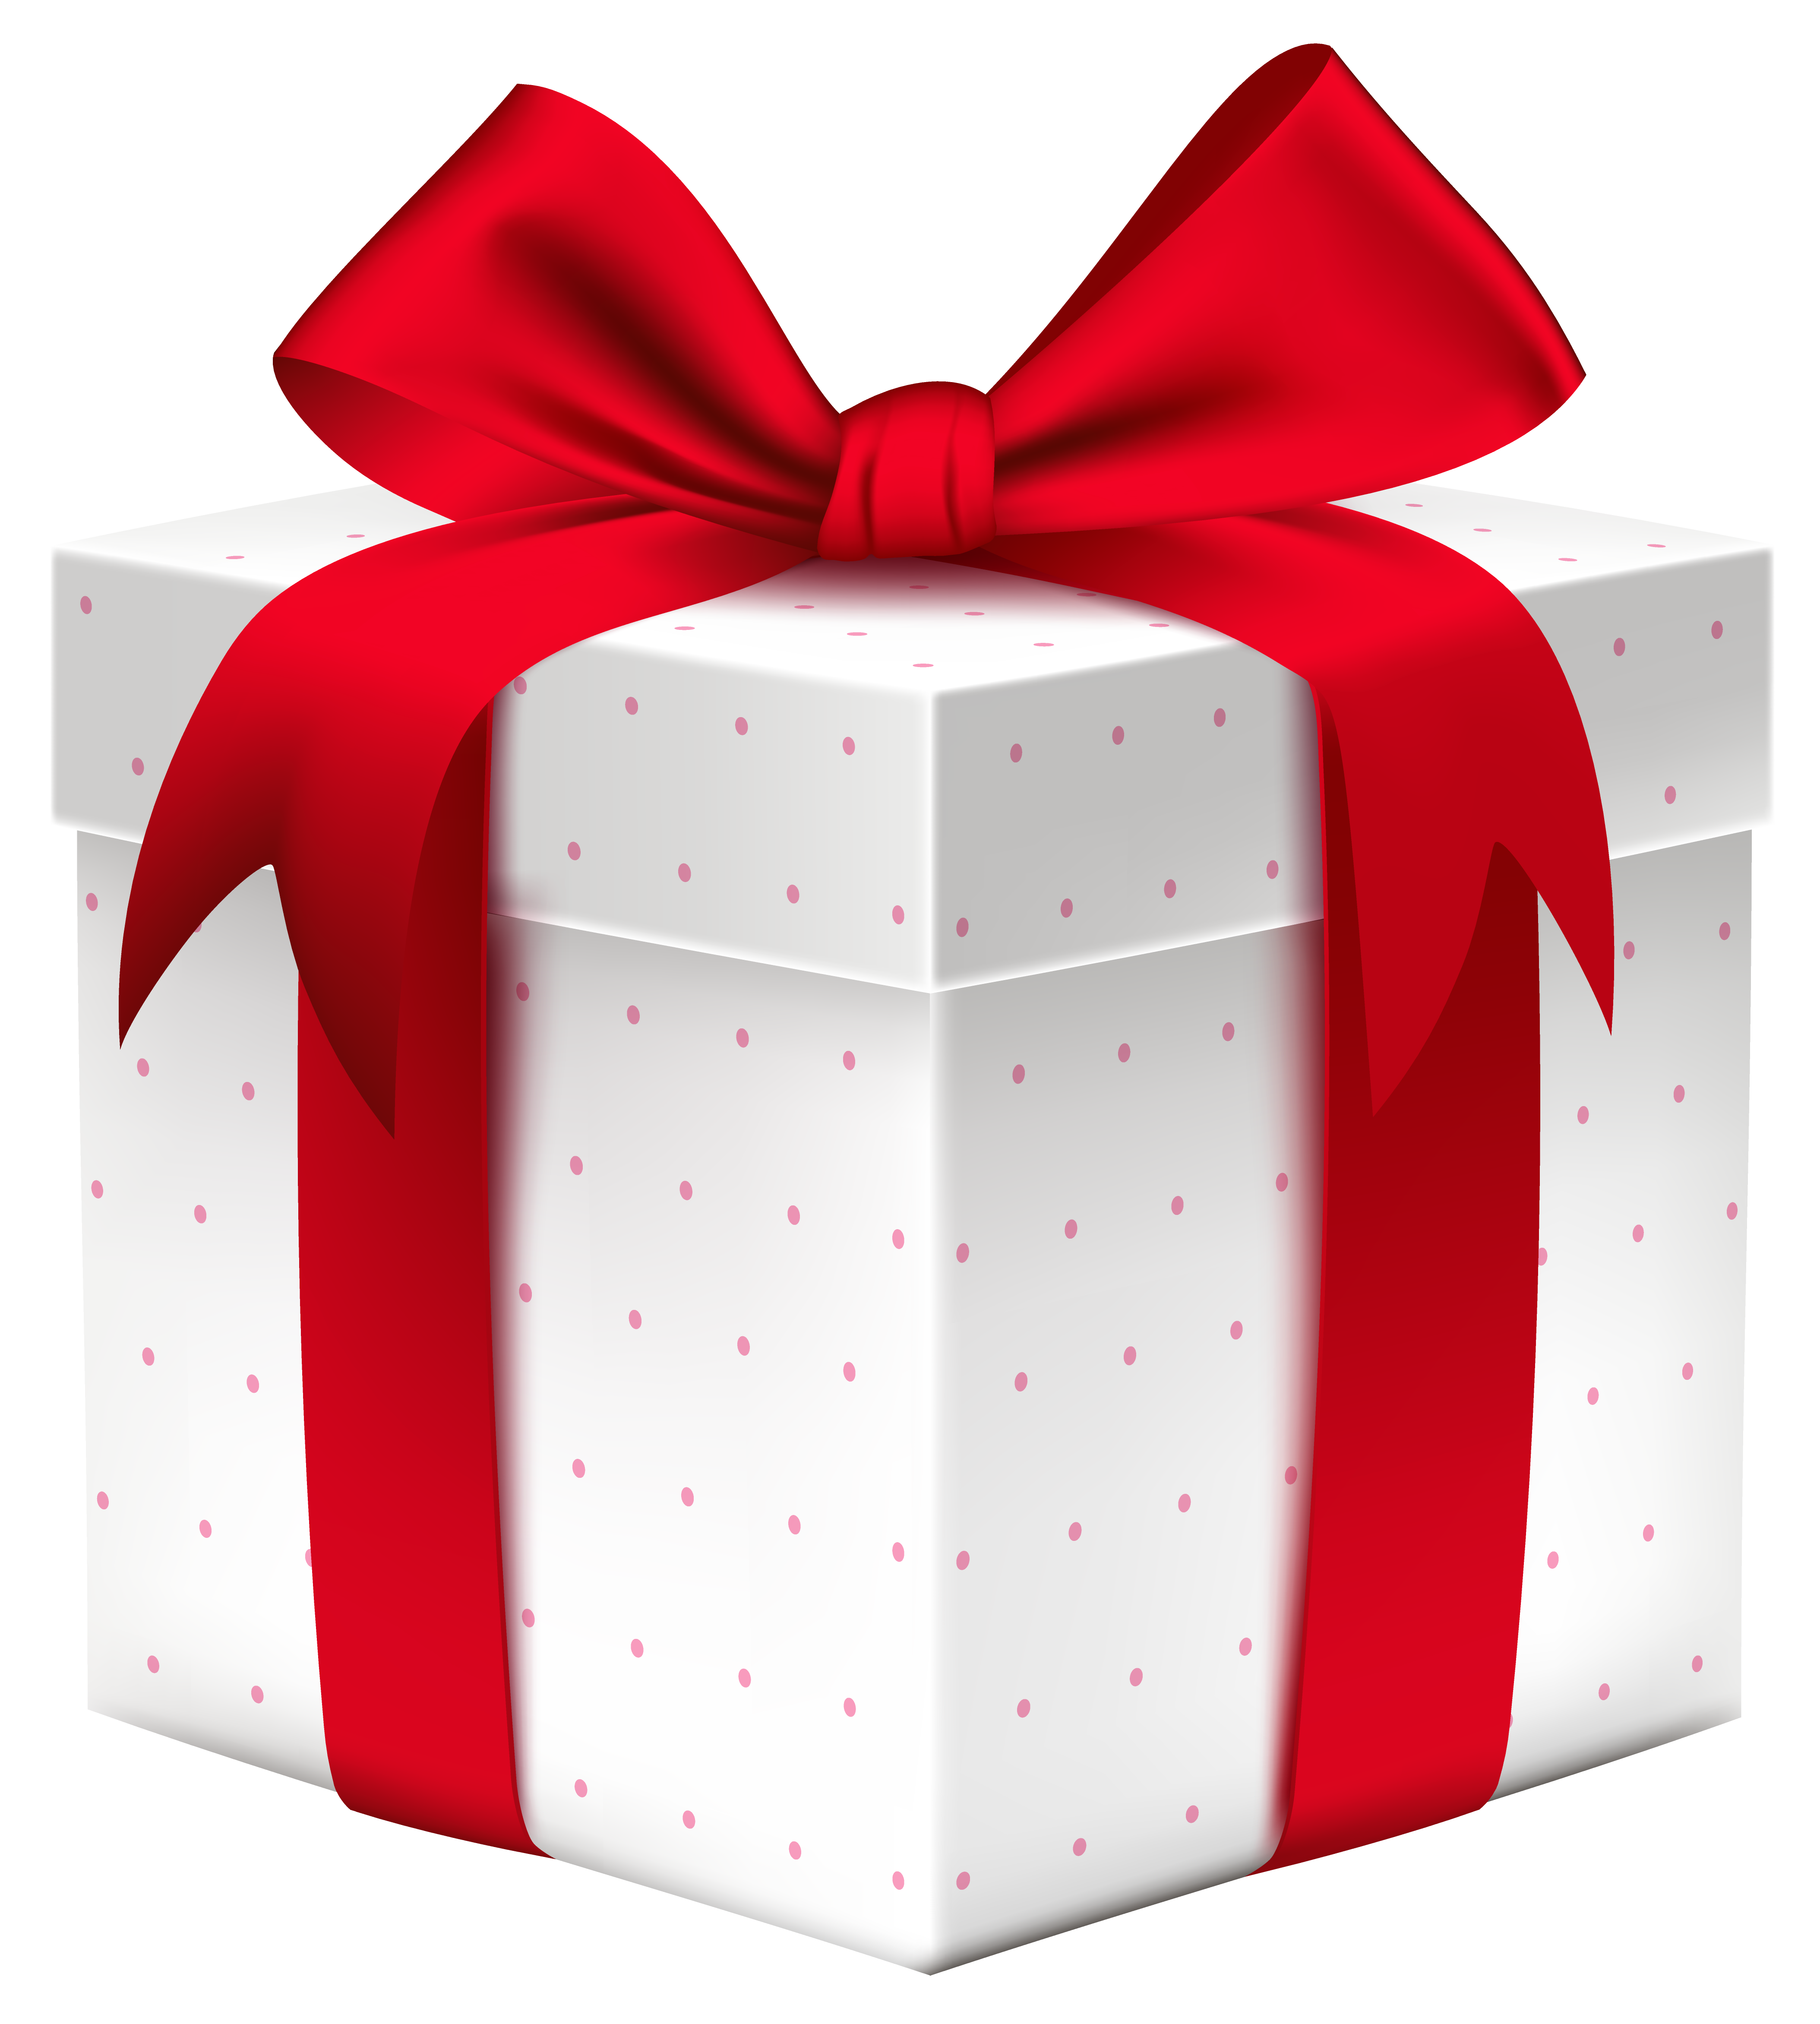 White Gift Box with Red Bow PNG Image.